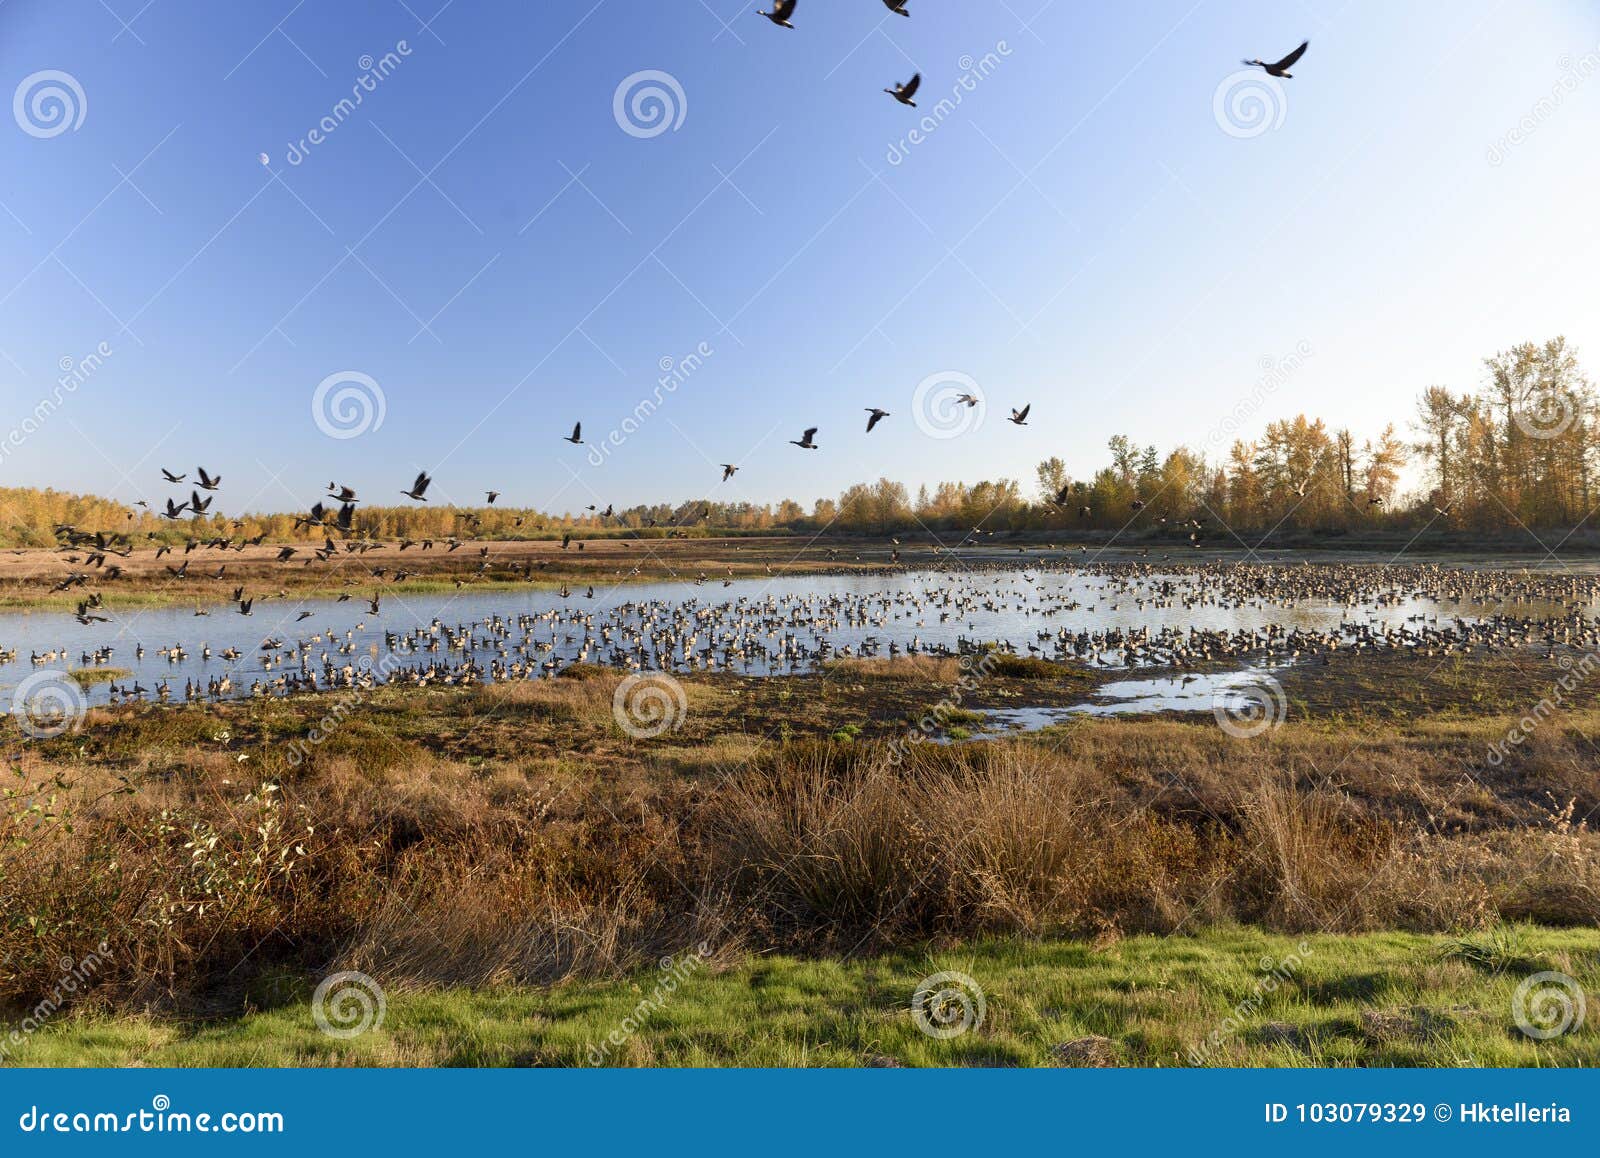 large flocks of canadian geese resting and staging during their annual autumn migration